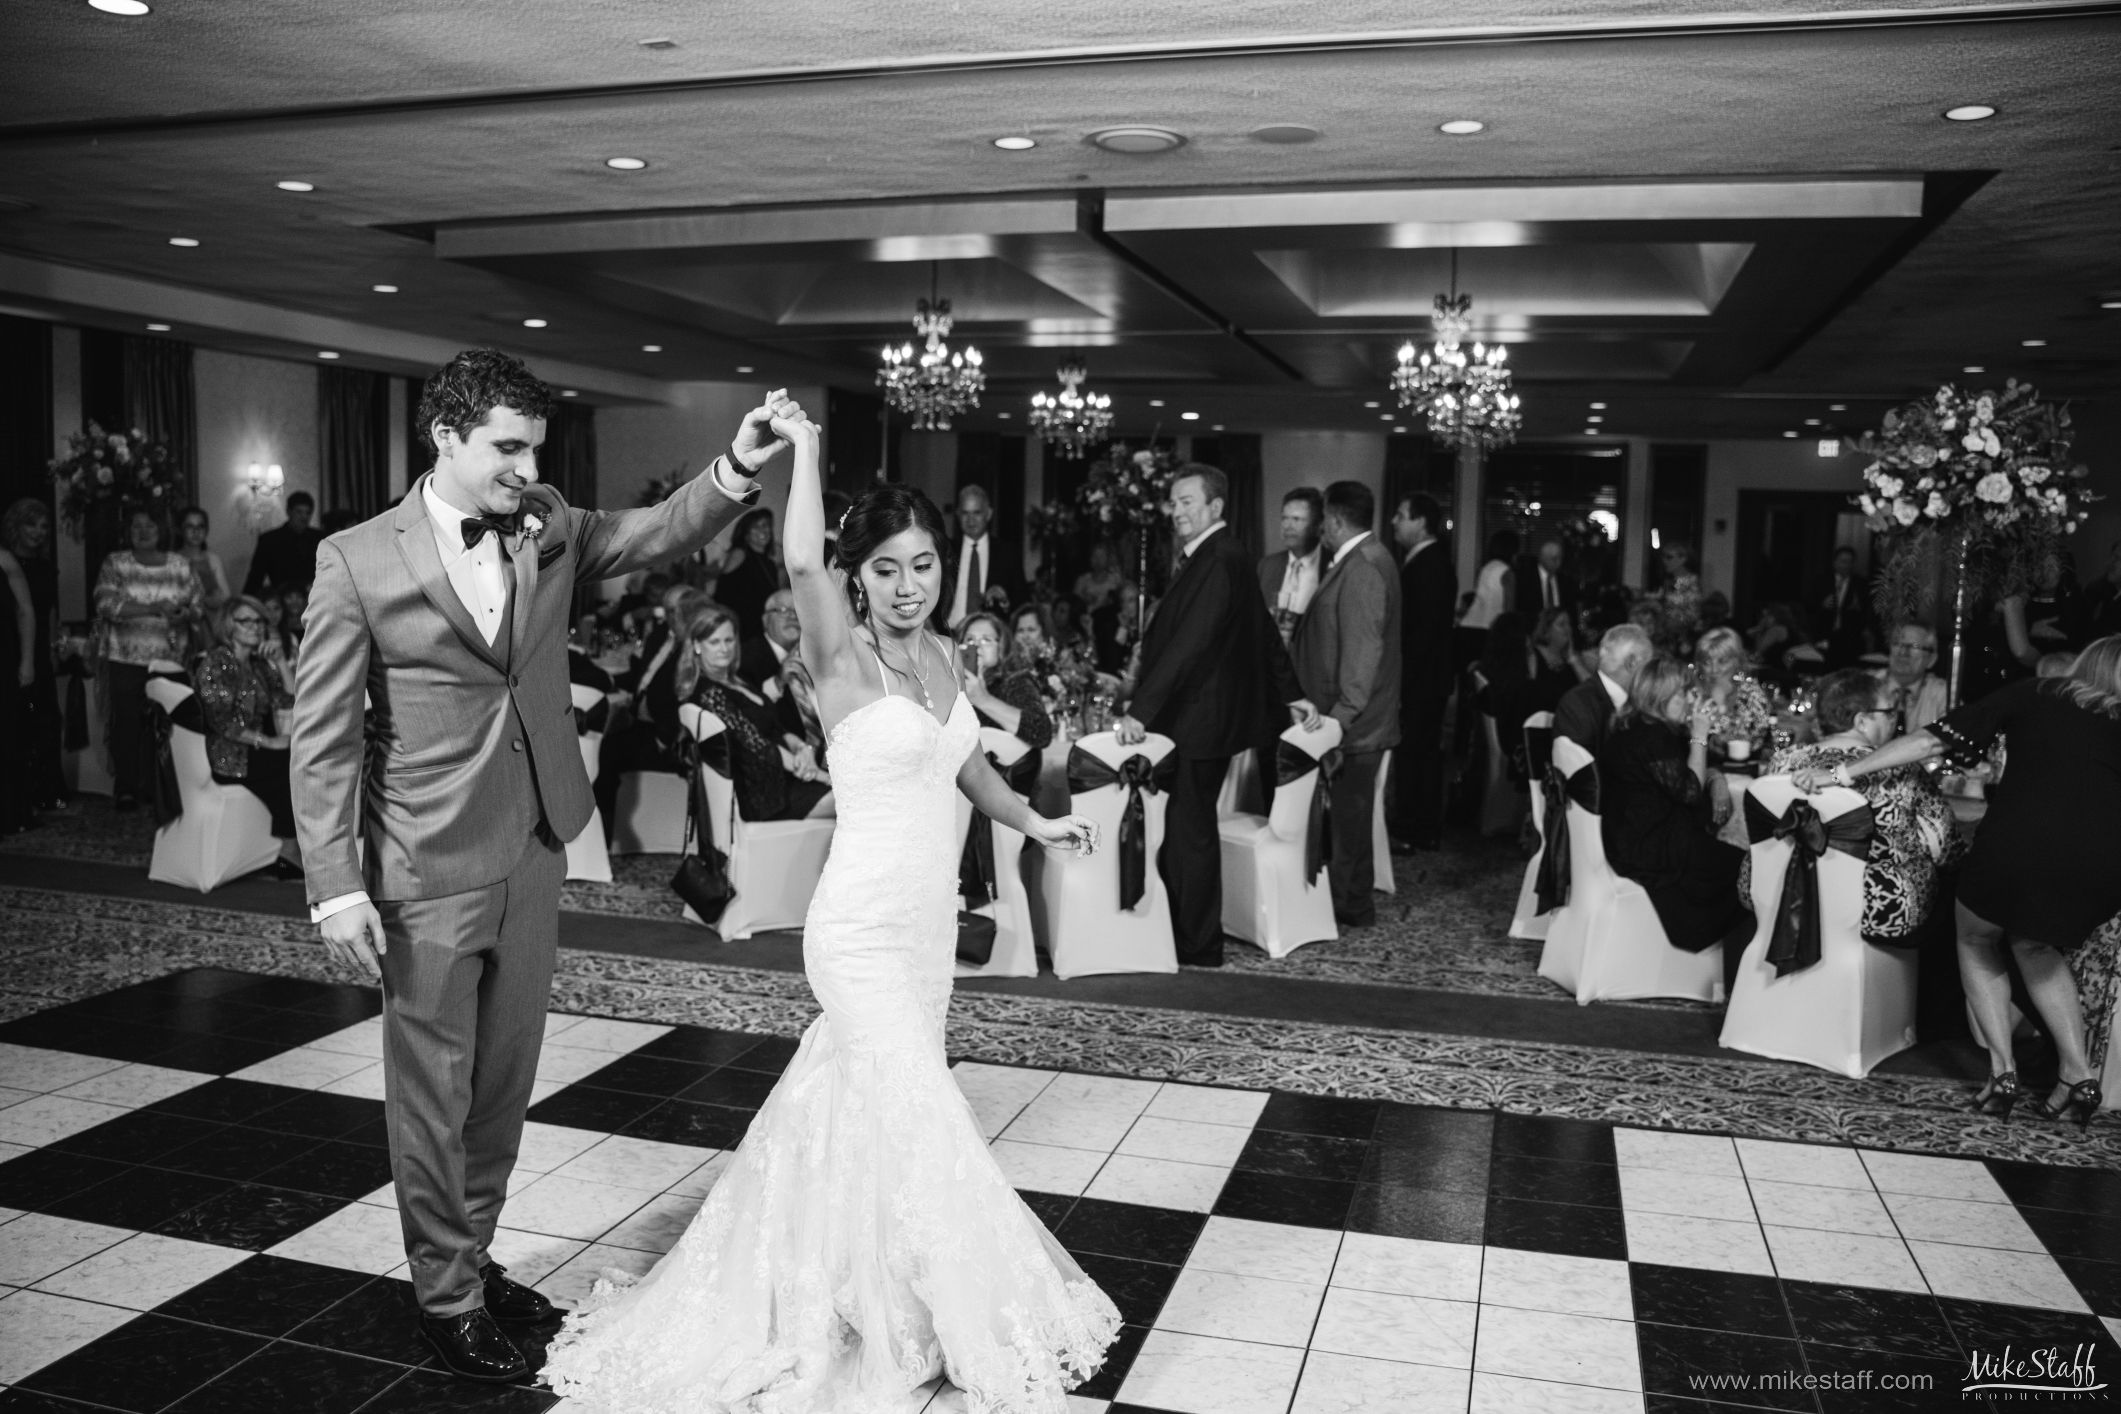 Have you read how to hire a great dj michigan wedding